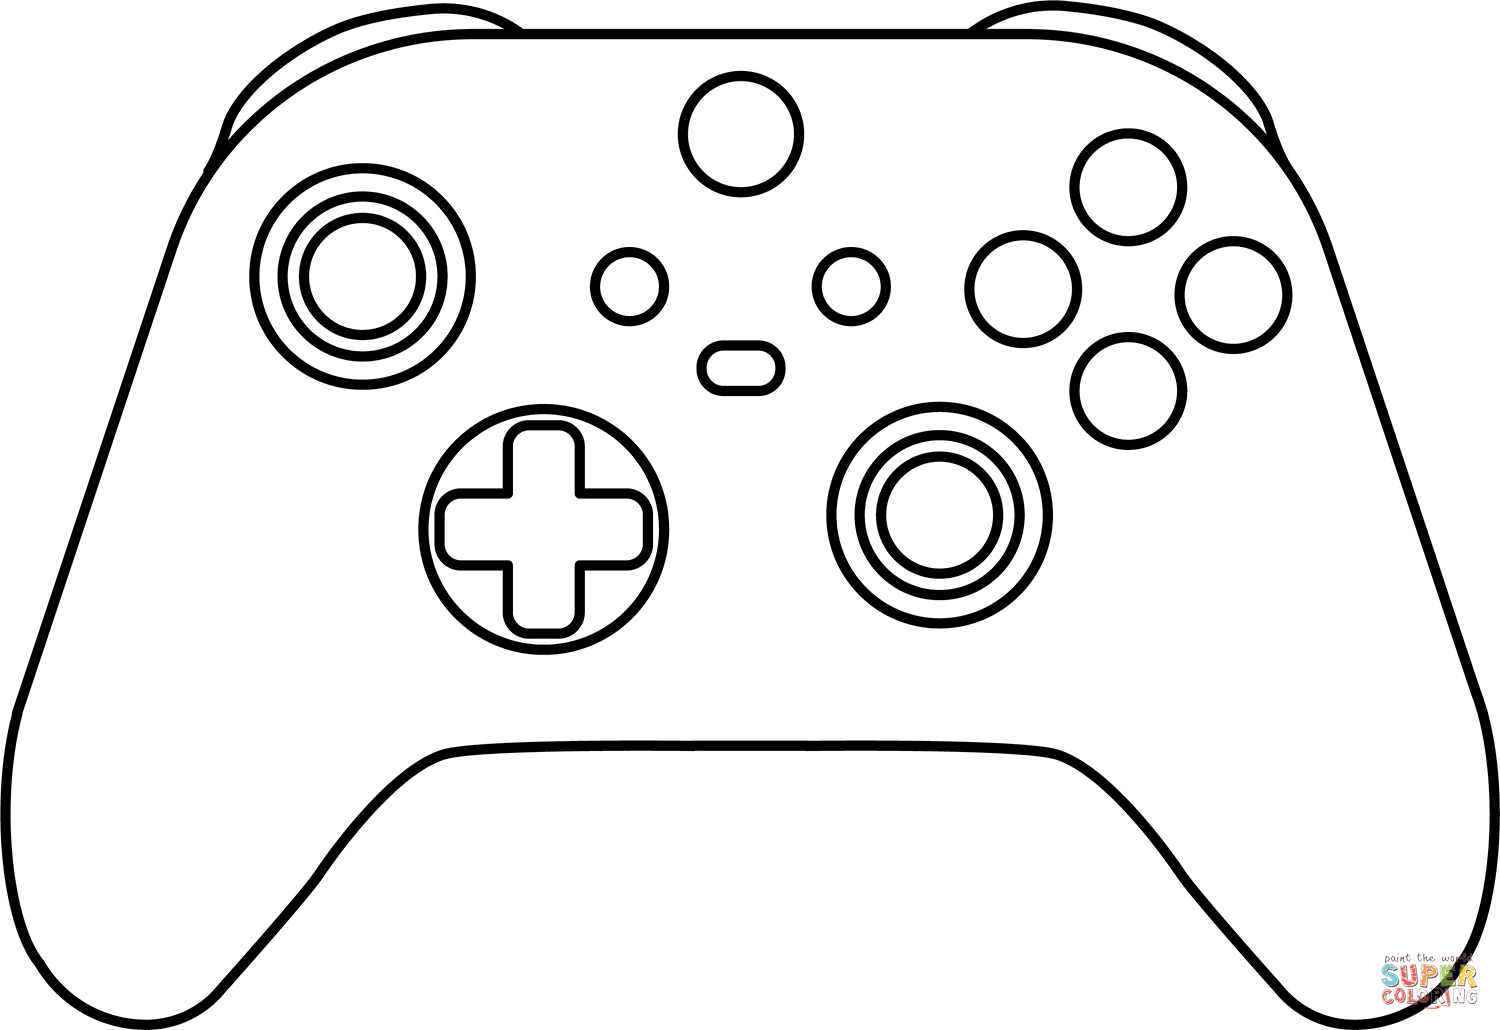 Xbox controller coloring page free printable coloring pages